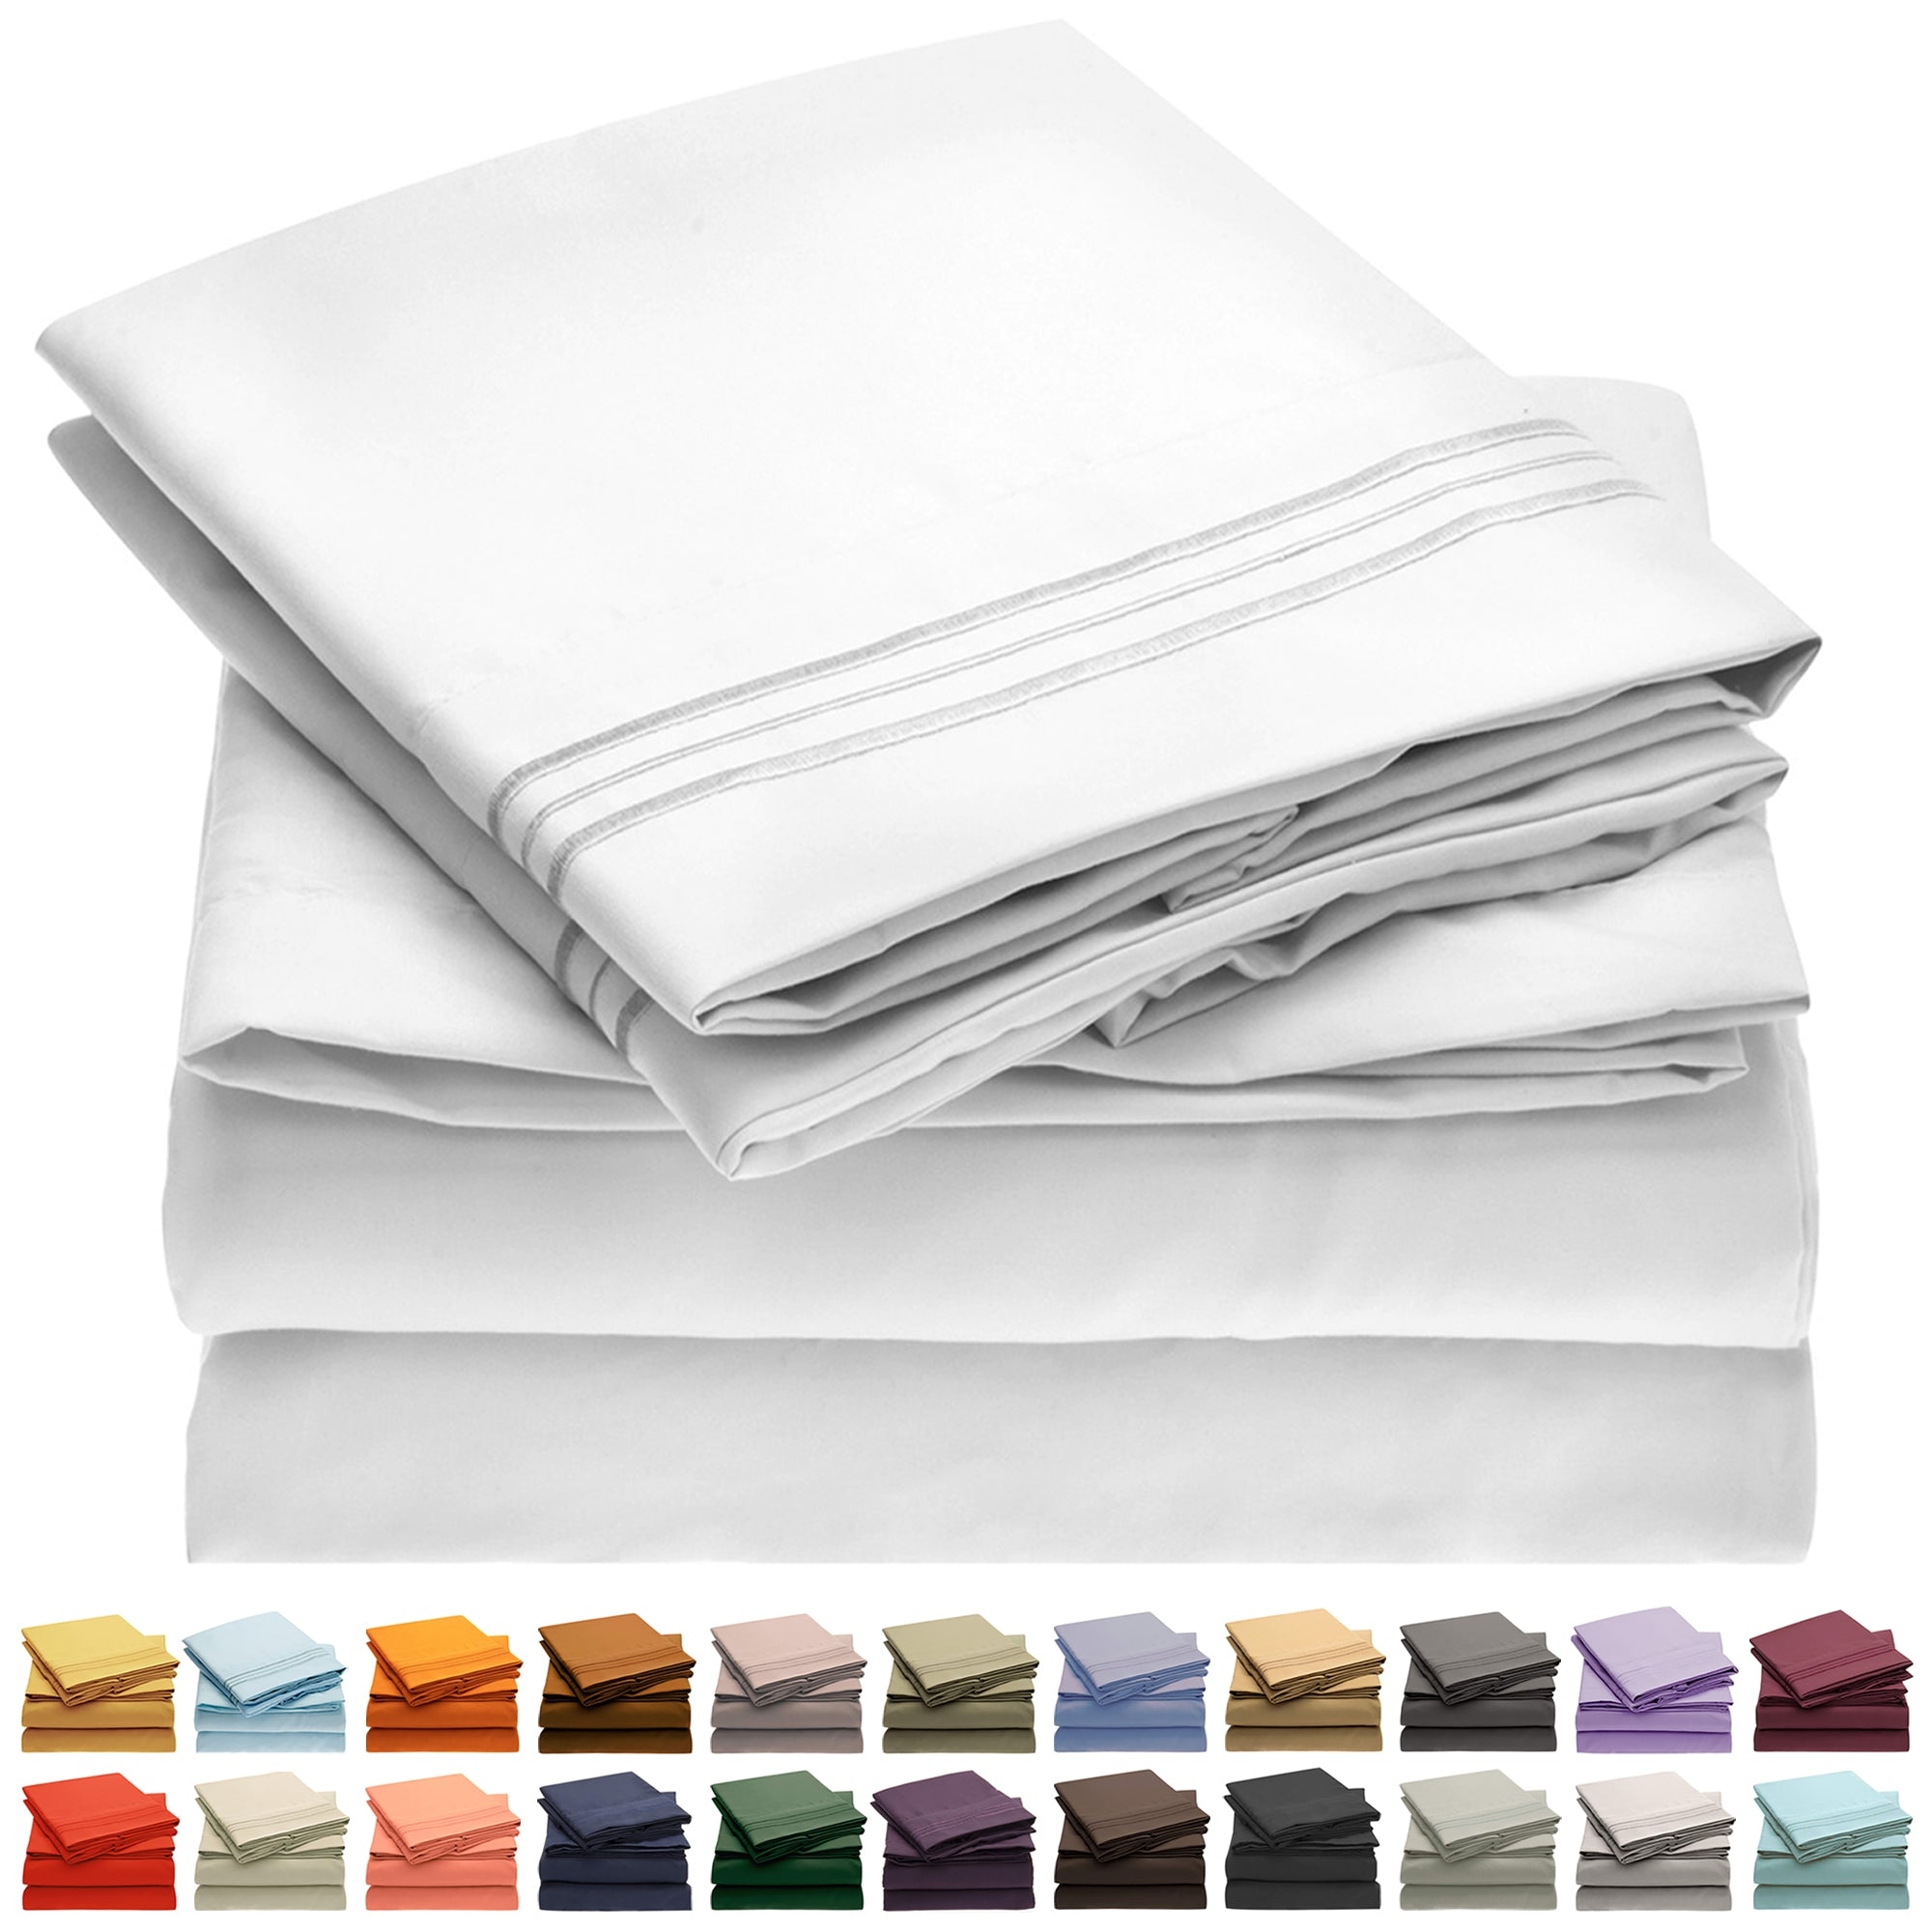 Mellanni Queen Sheet Set Iconic Collection Bedding Sheets And Pillowcases Hotel Luxury Soft 5335